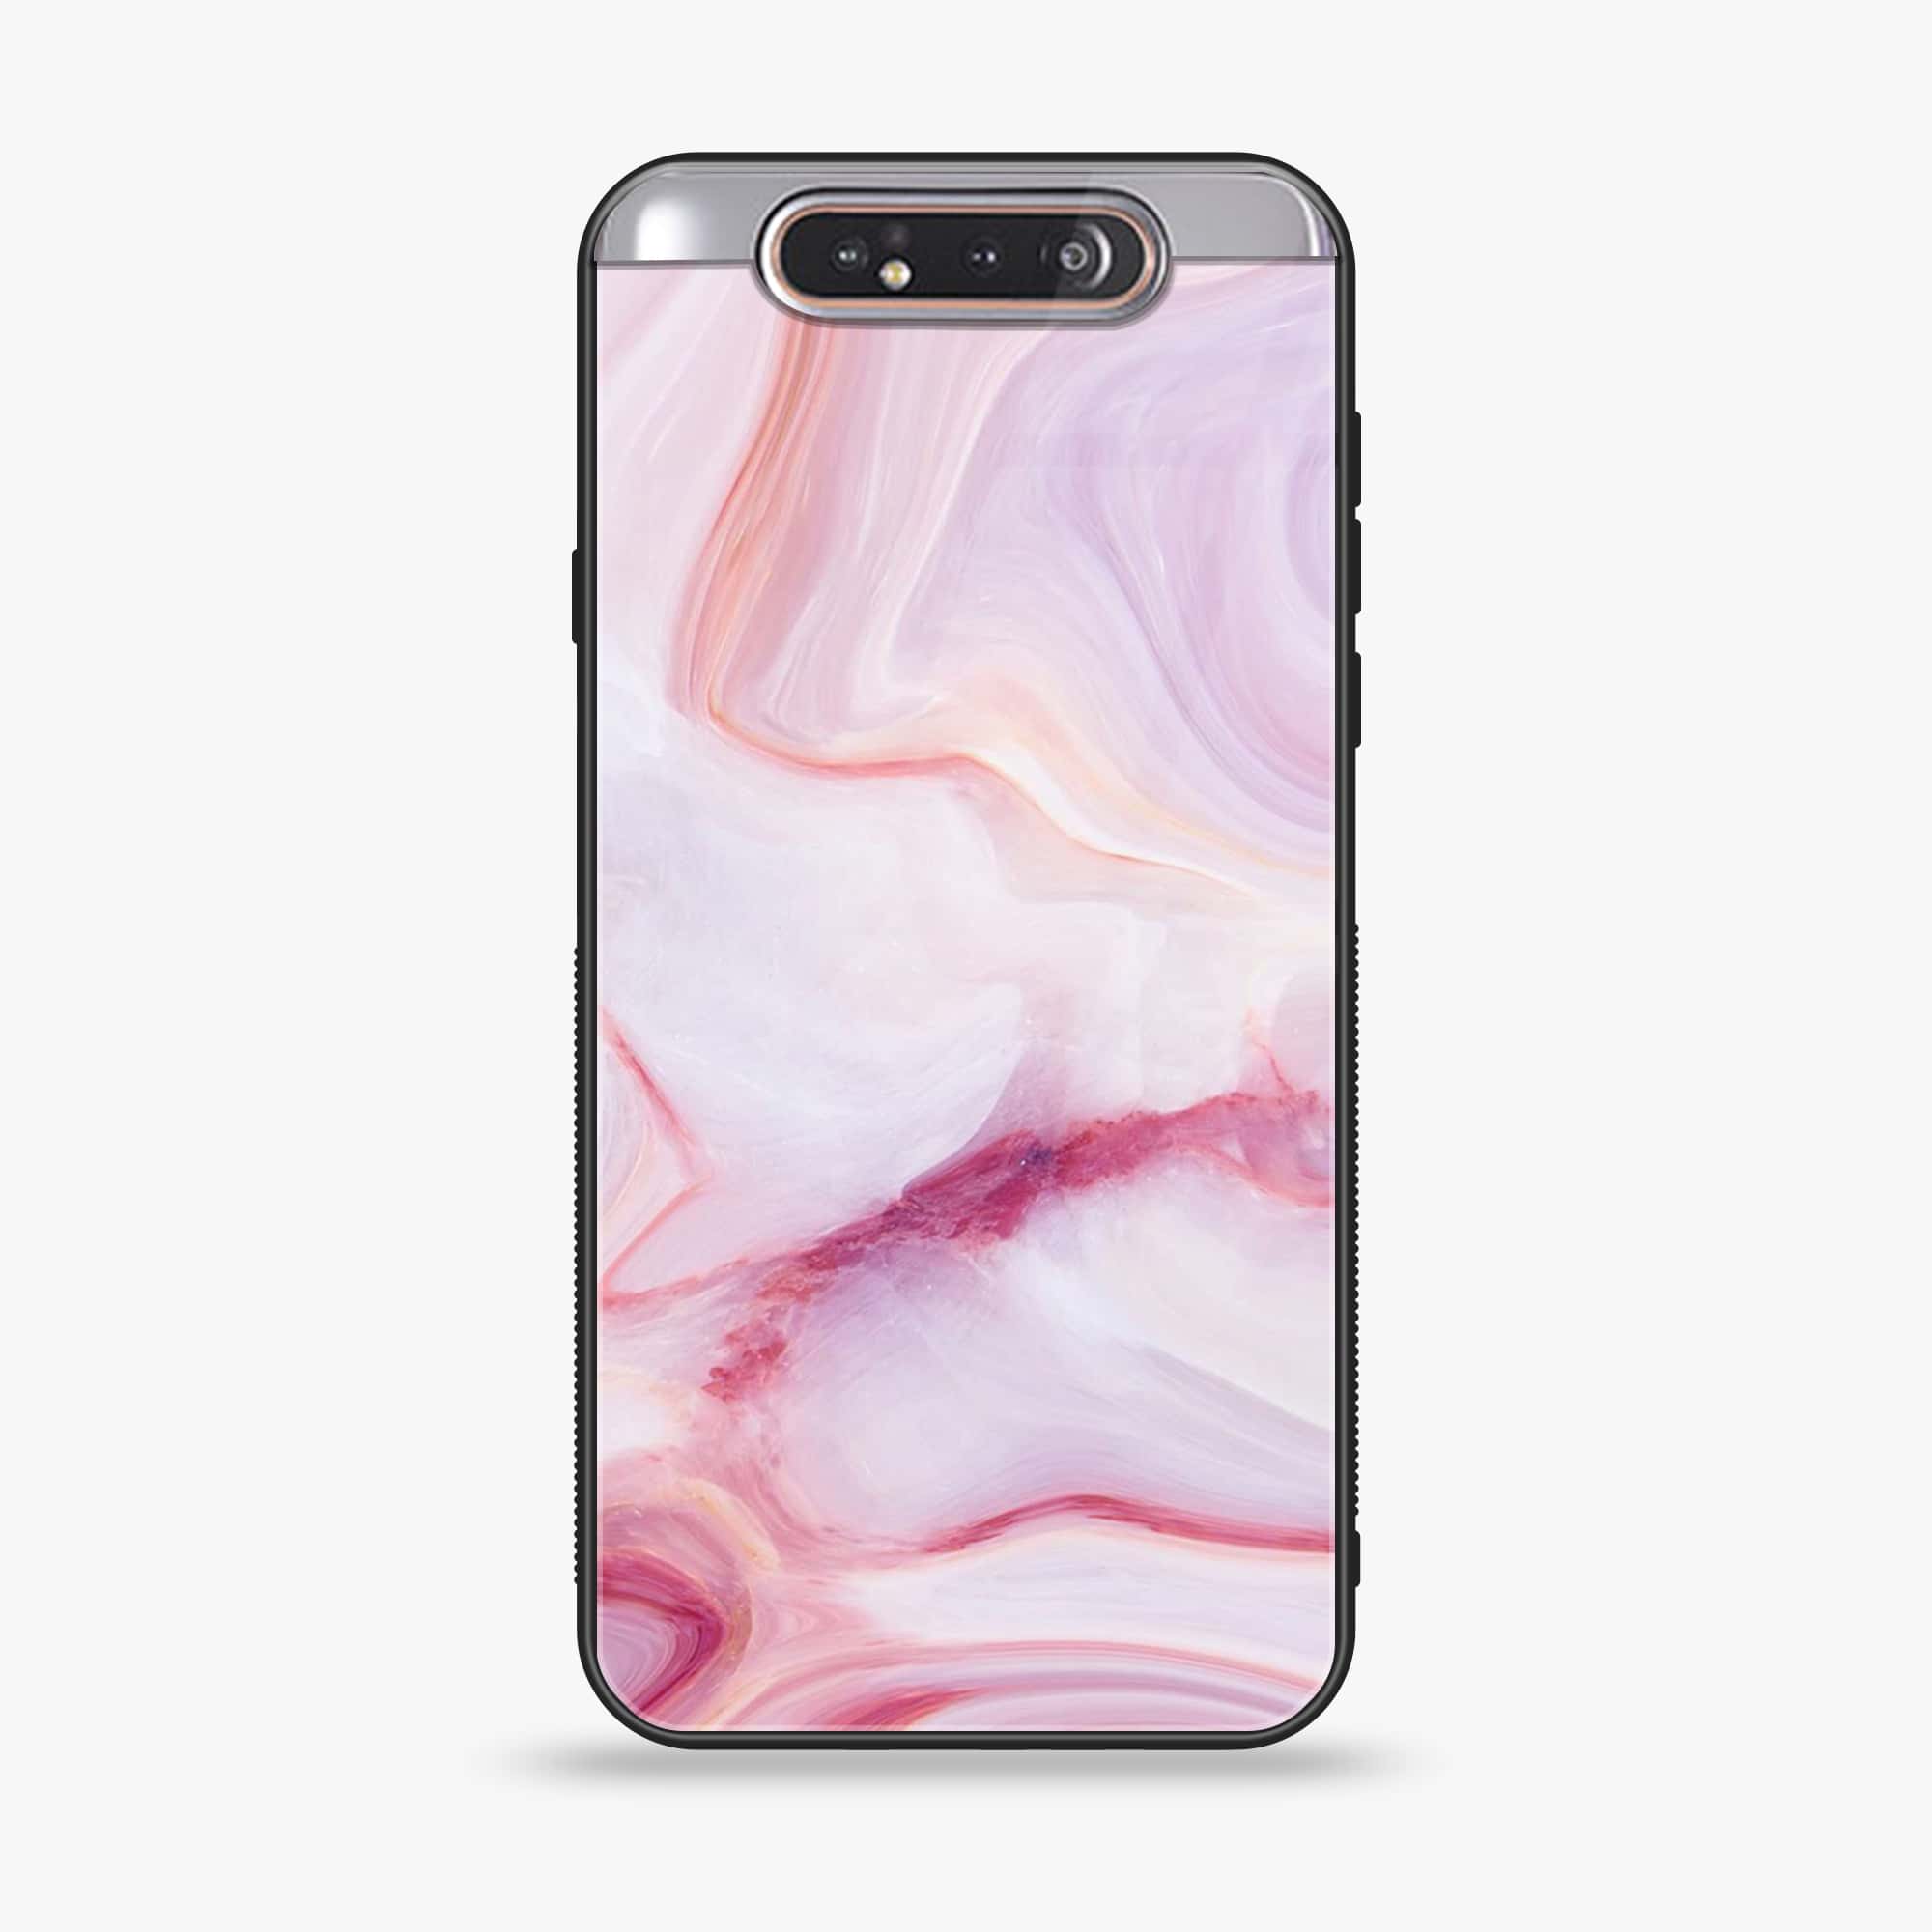 Samsung Galaxy A80 - Pink Marble Series - Premium Printed Glass soft Bumper shock Proof Case